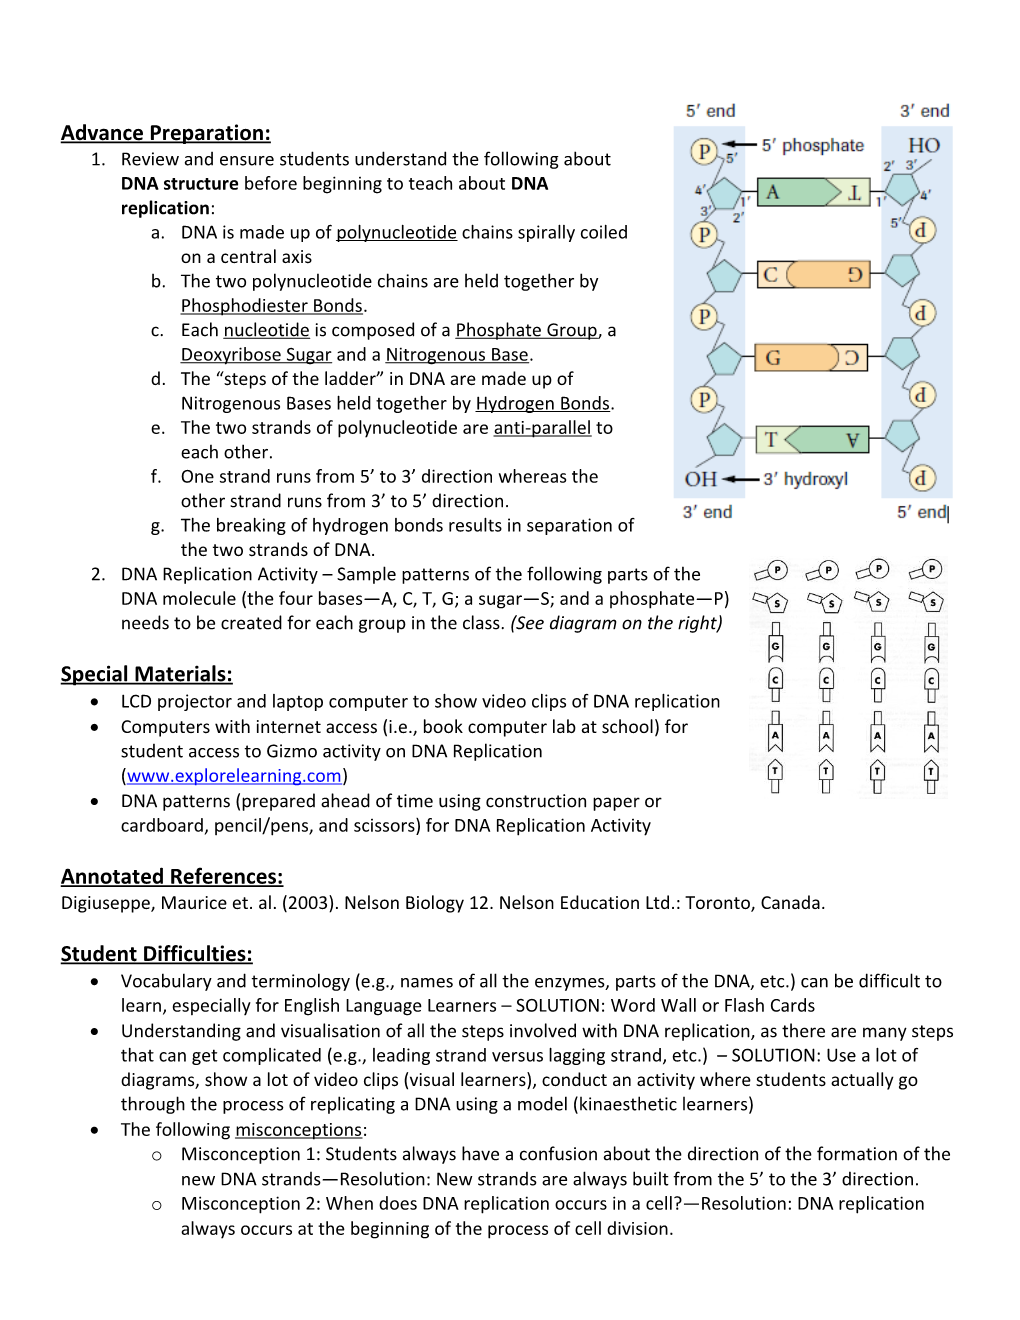 DNA Replication and Repair SUMMARY